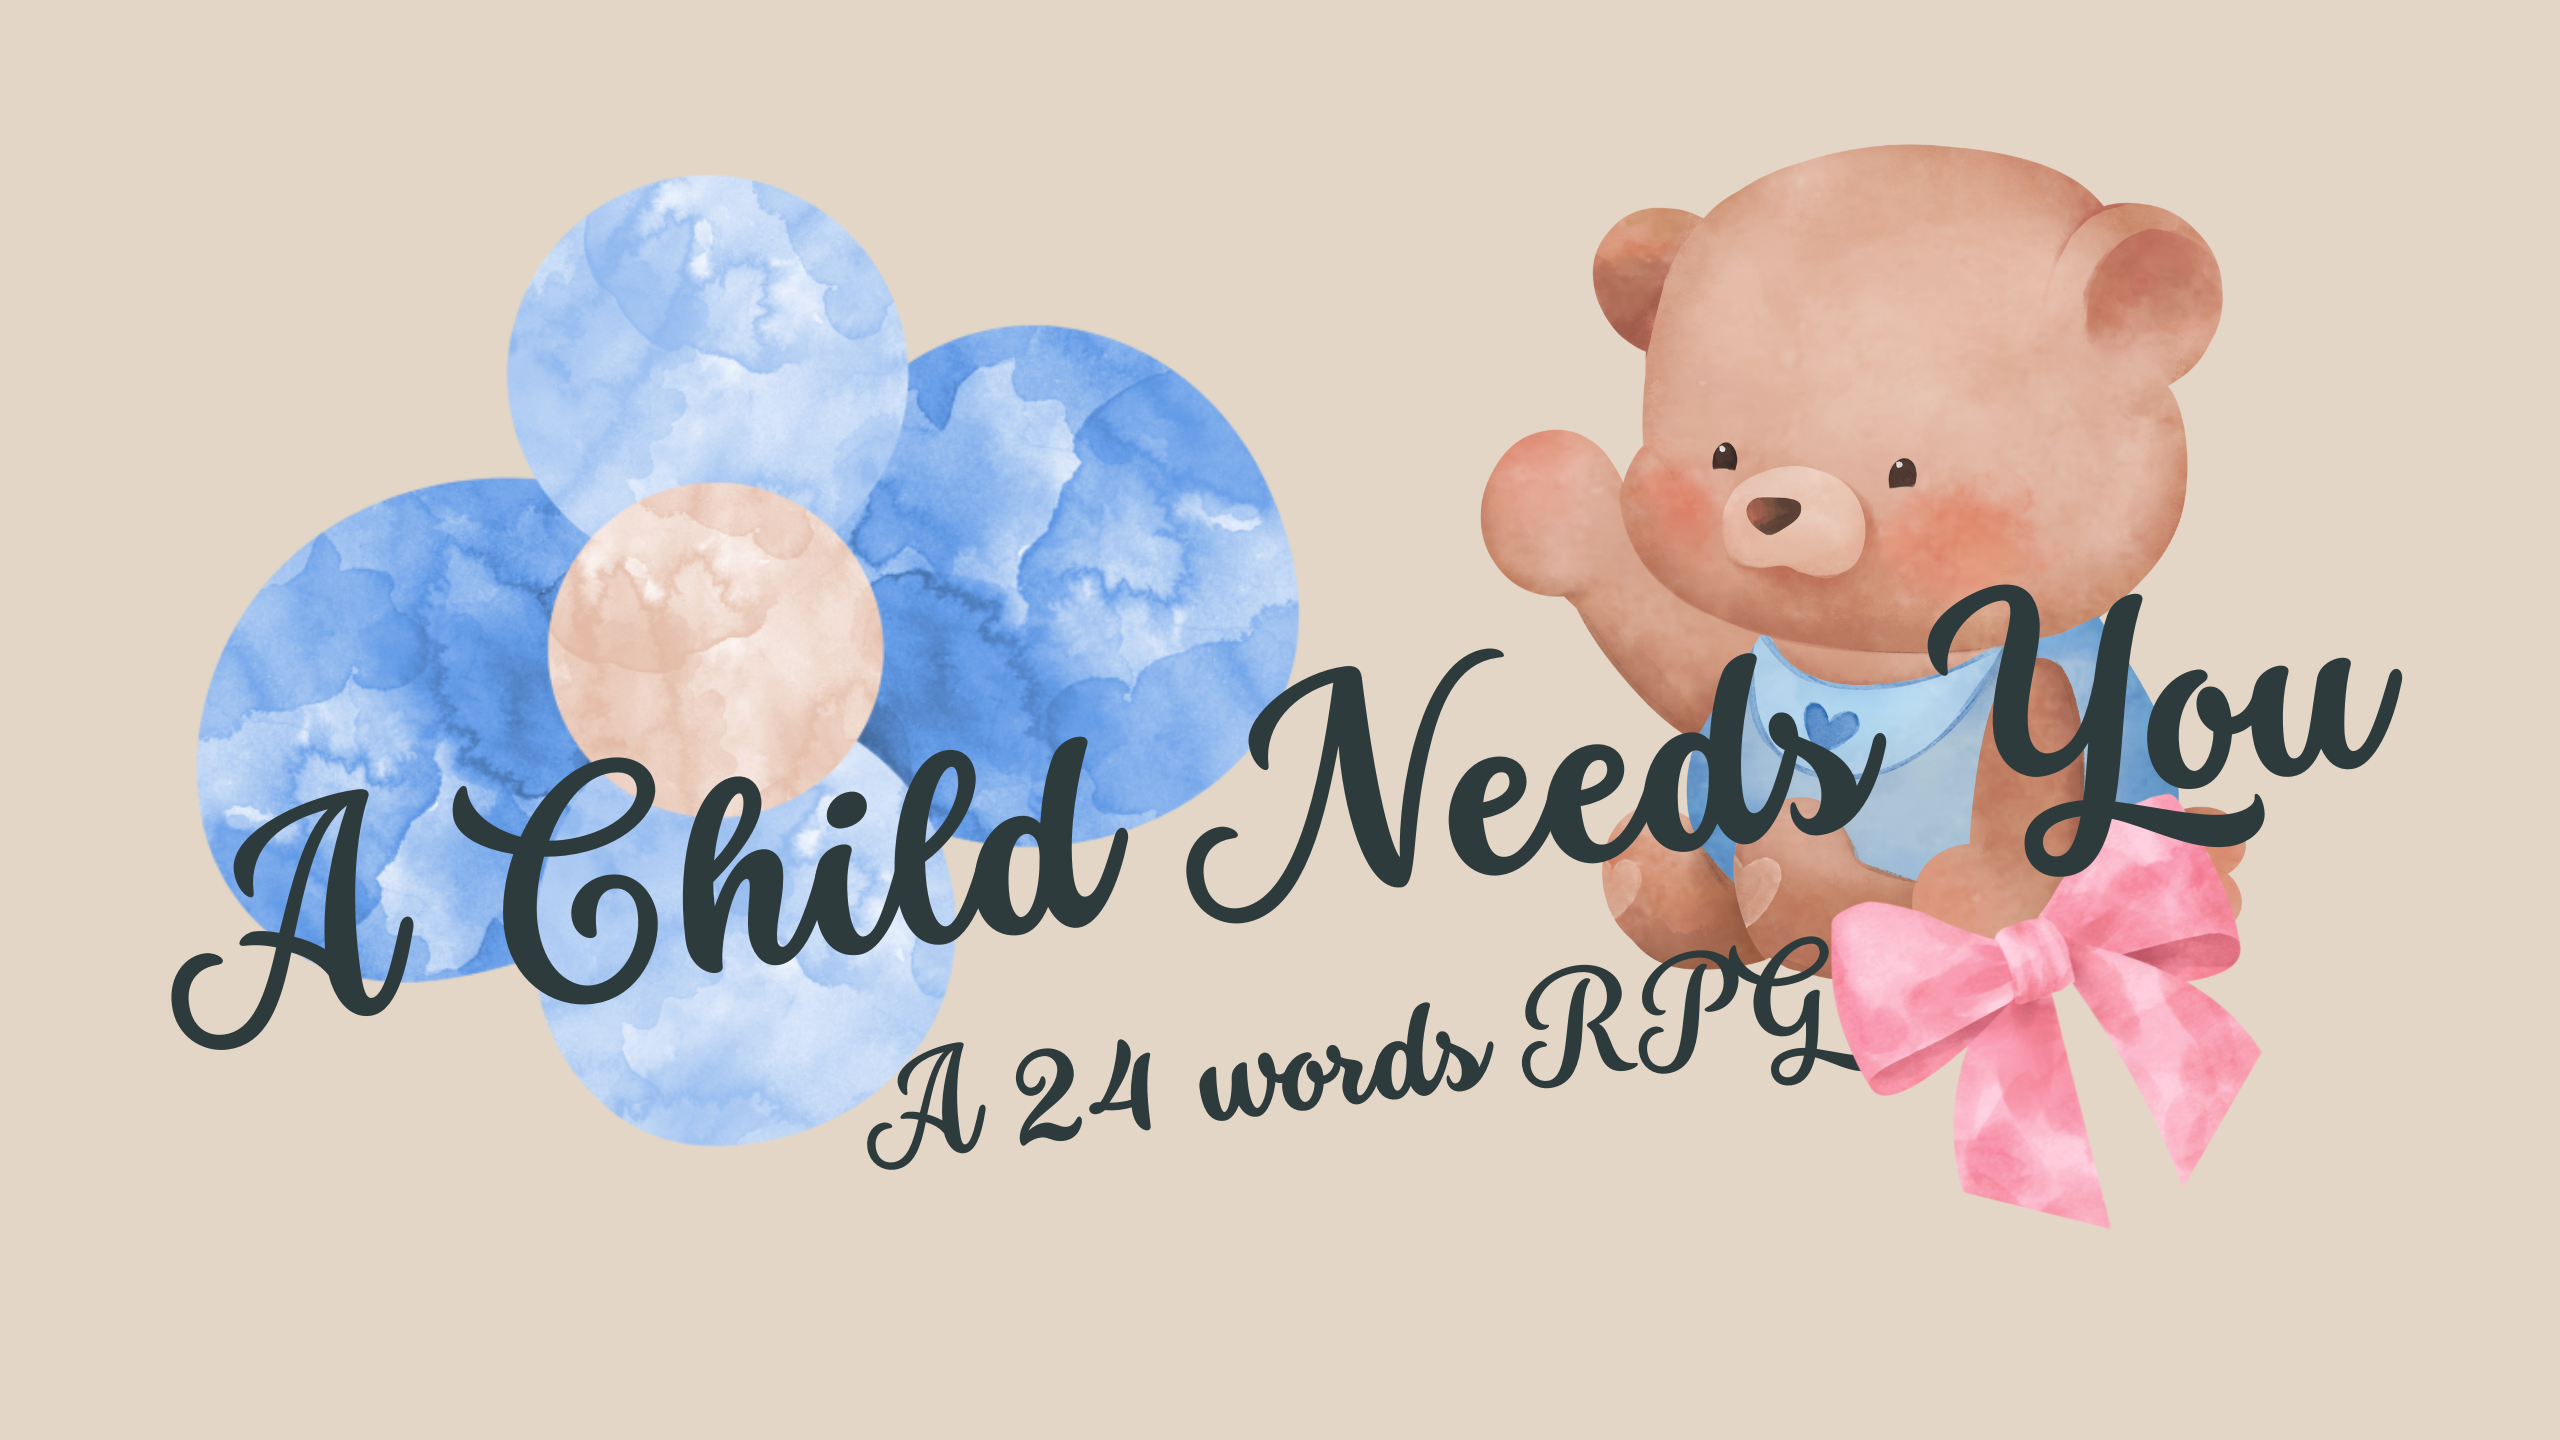 A Child Needs You